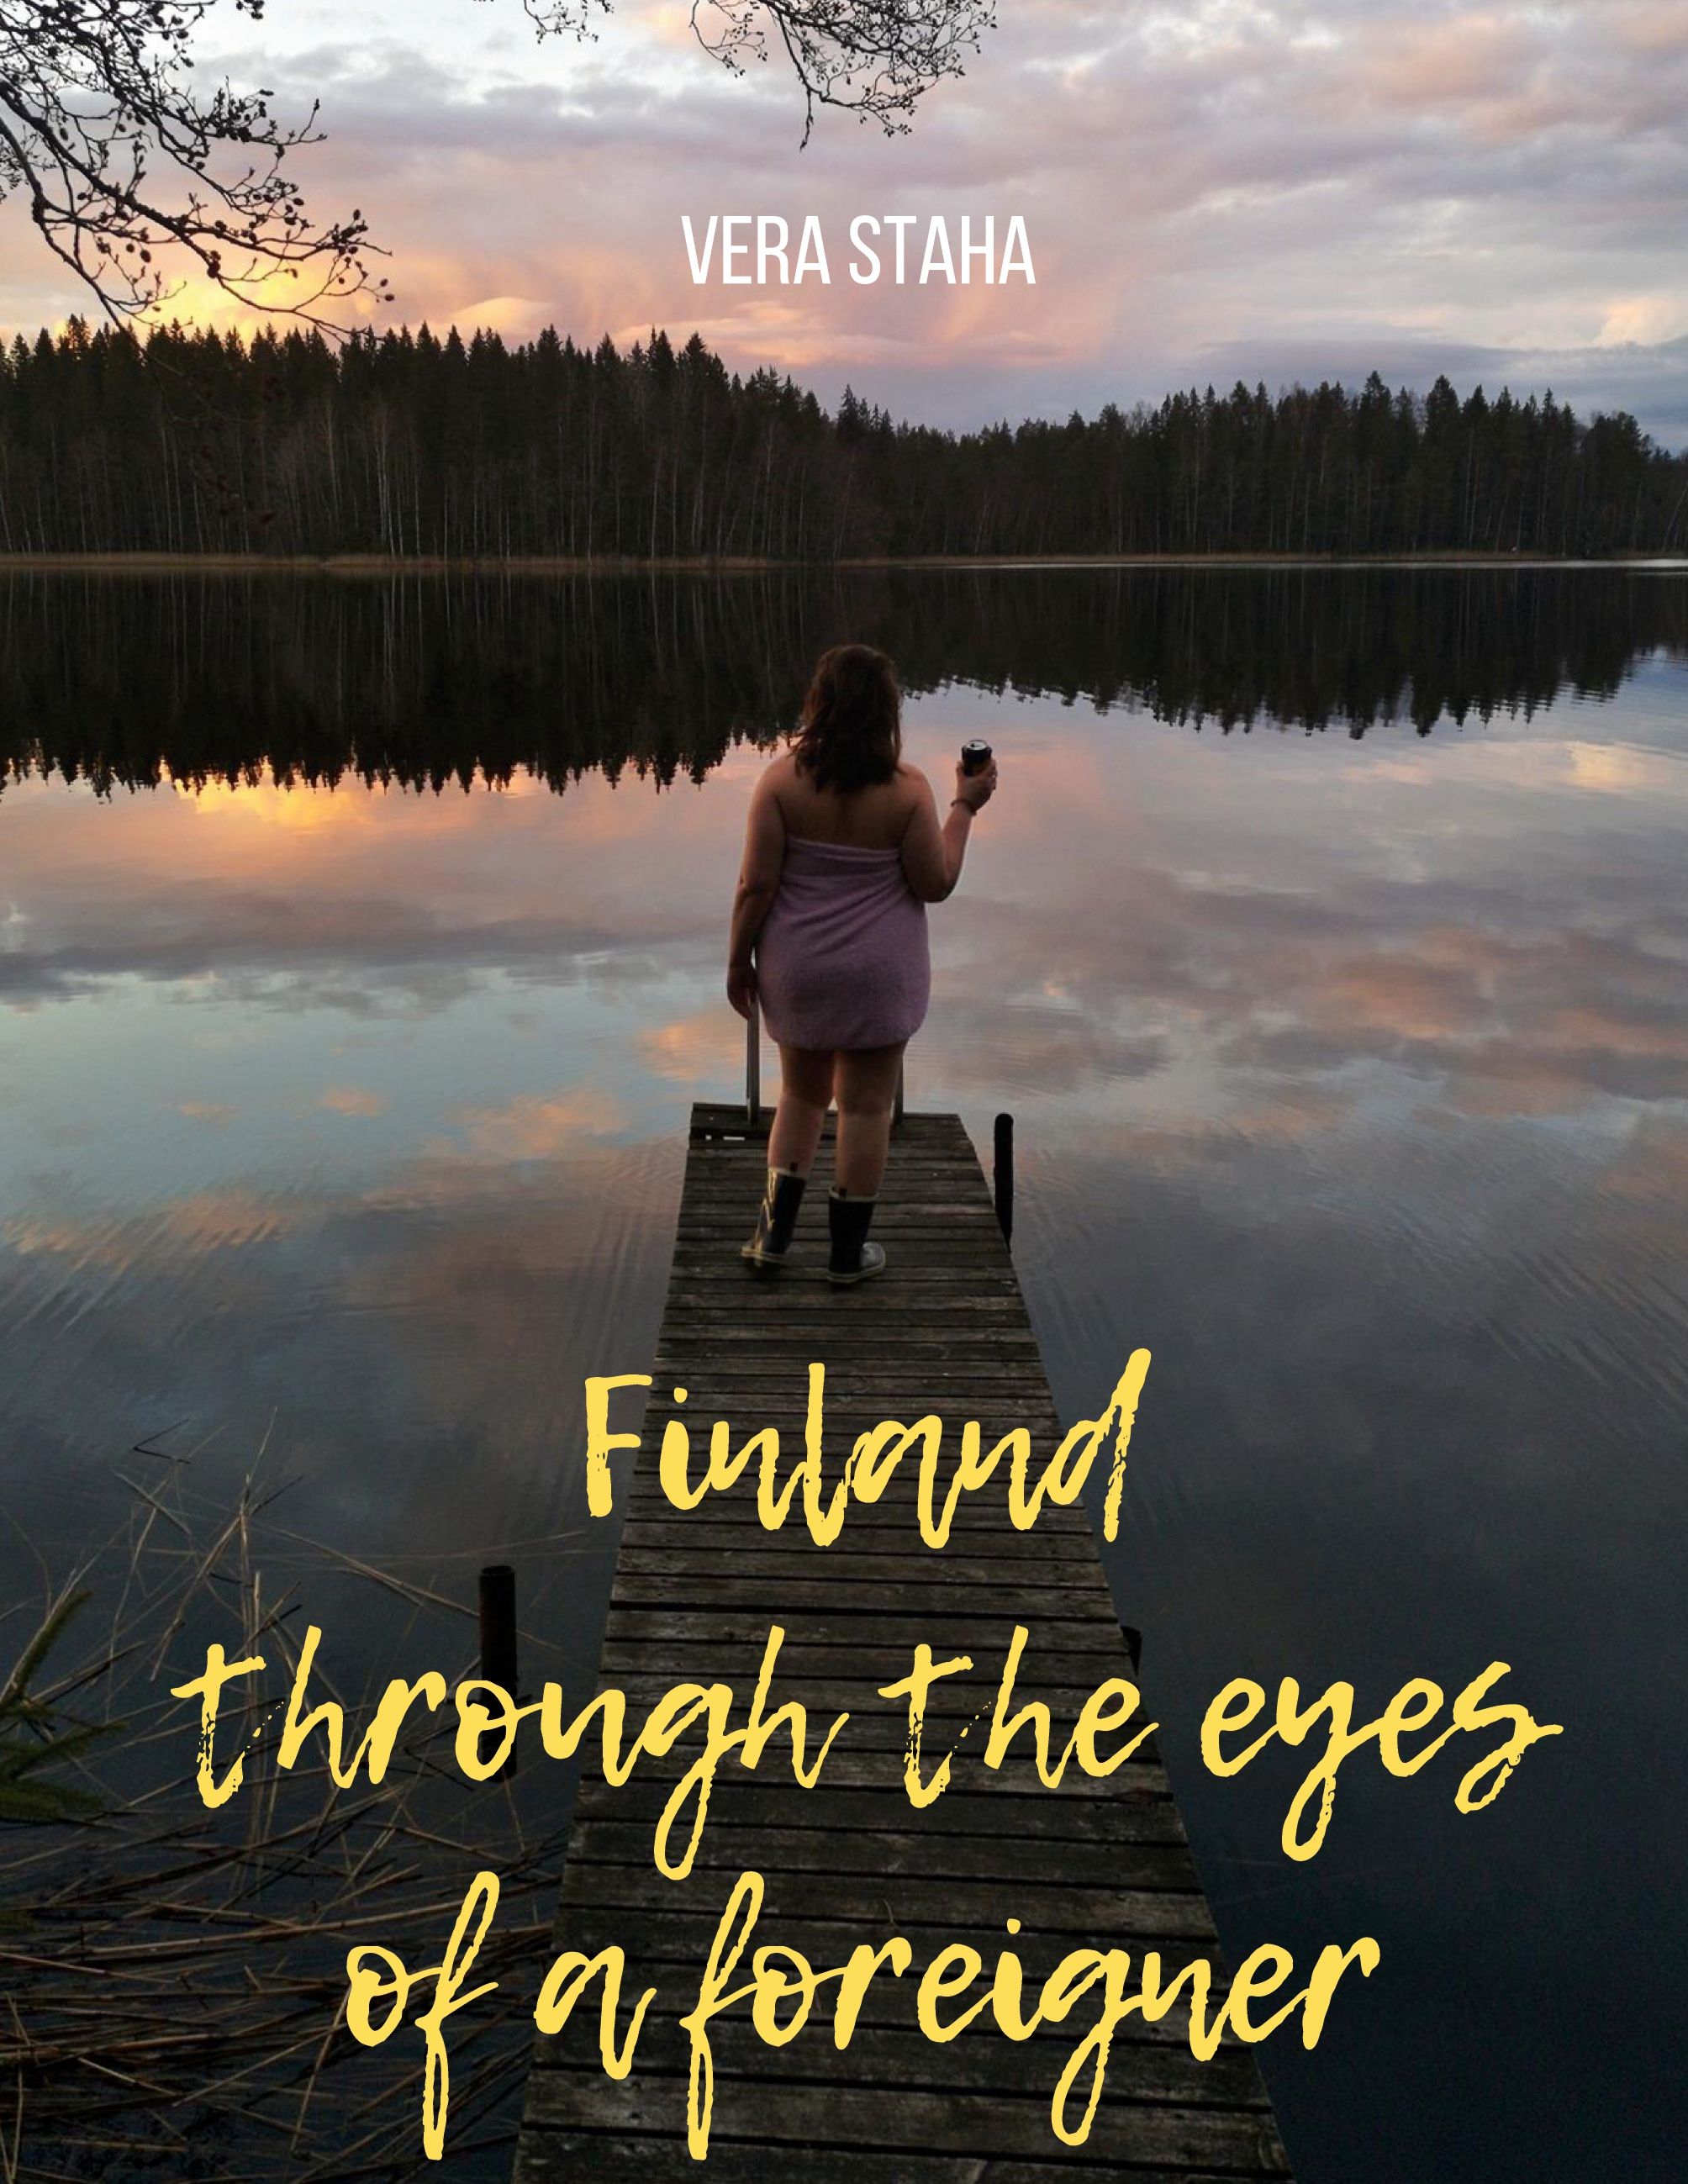 Vera Staha : Finland through the eyes of a foreigner